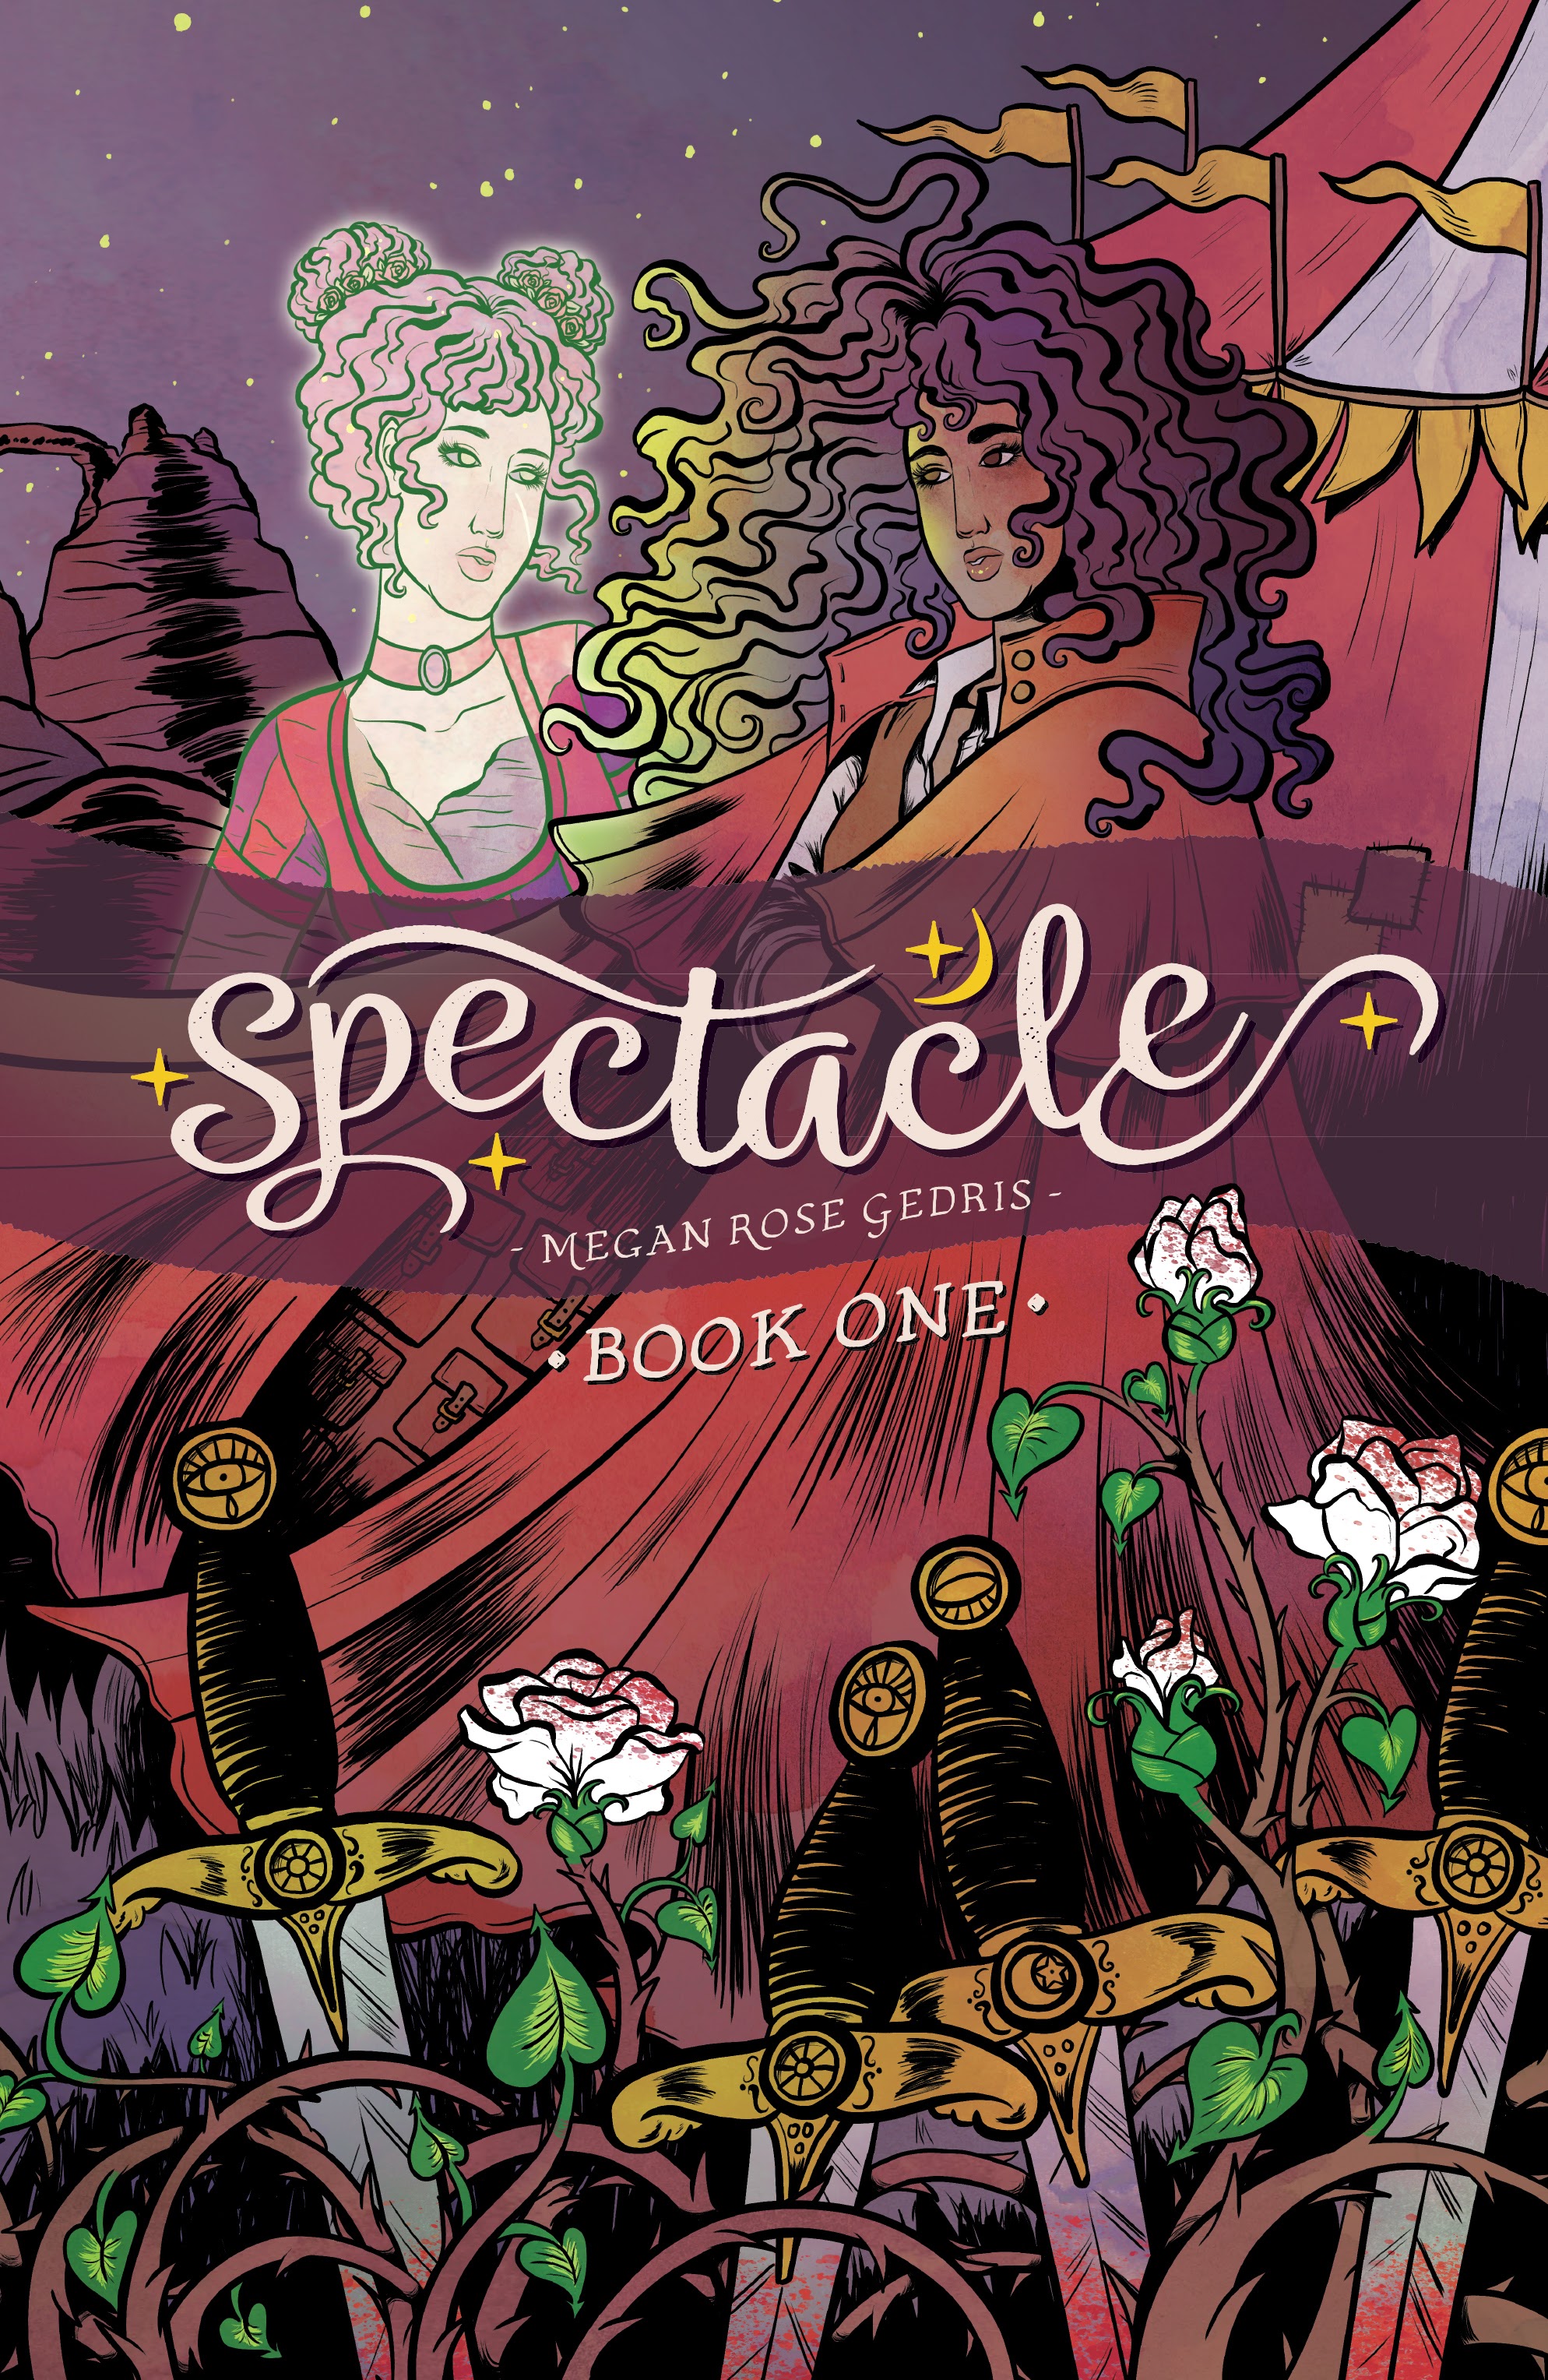 Read online Spectacle comic -  Issue # TPB 1 - 1